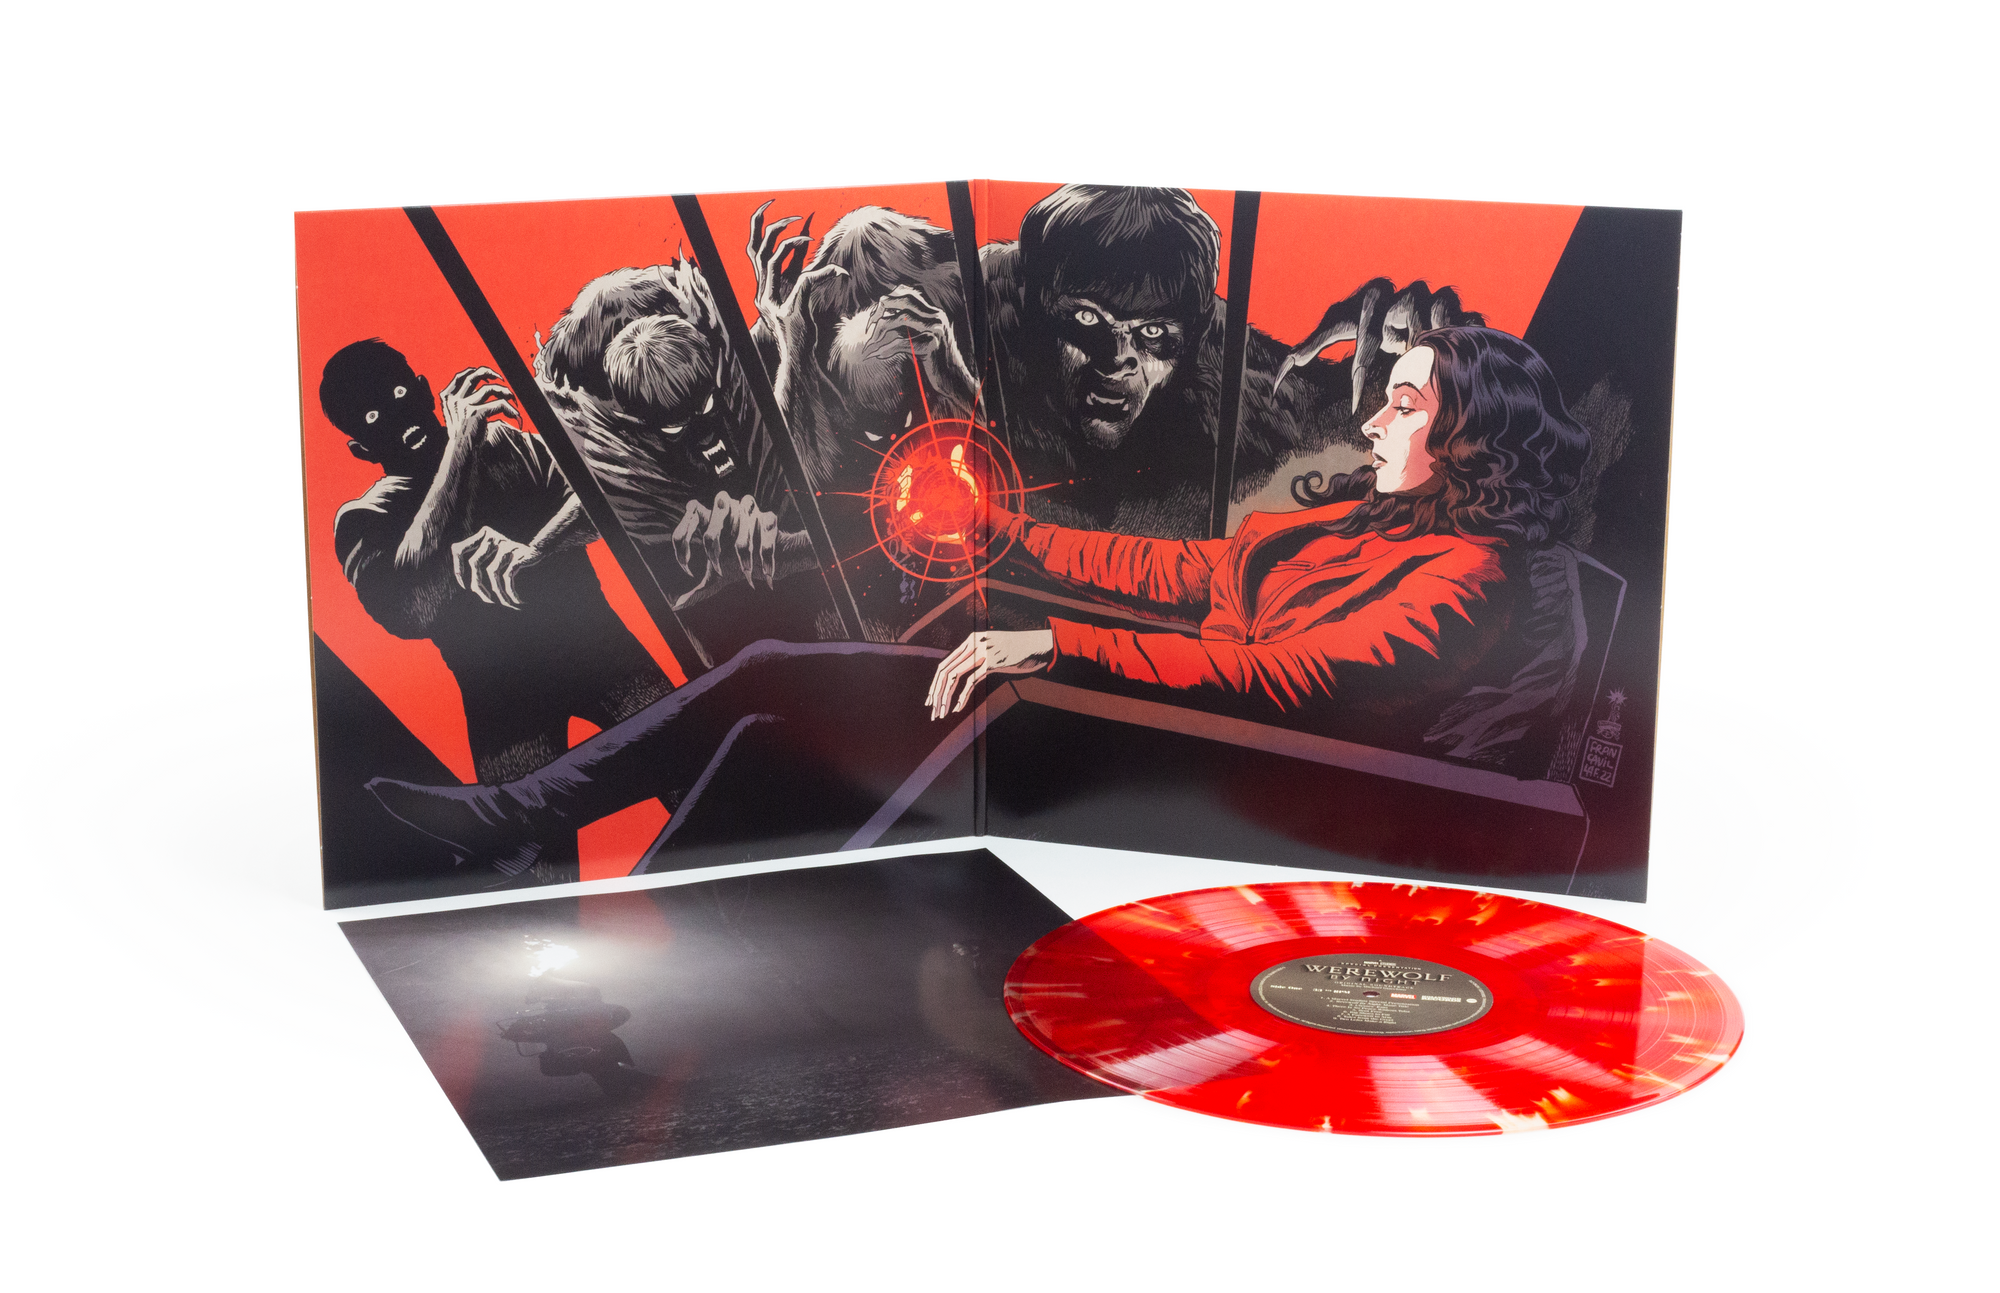 Michael Giacchino's “Werewolf by Night” Score Now Available on Vinyl 